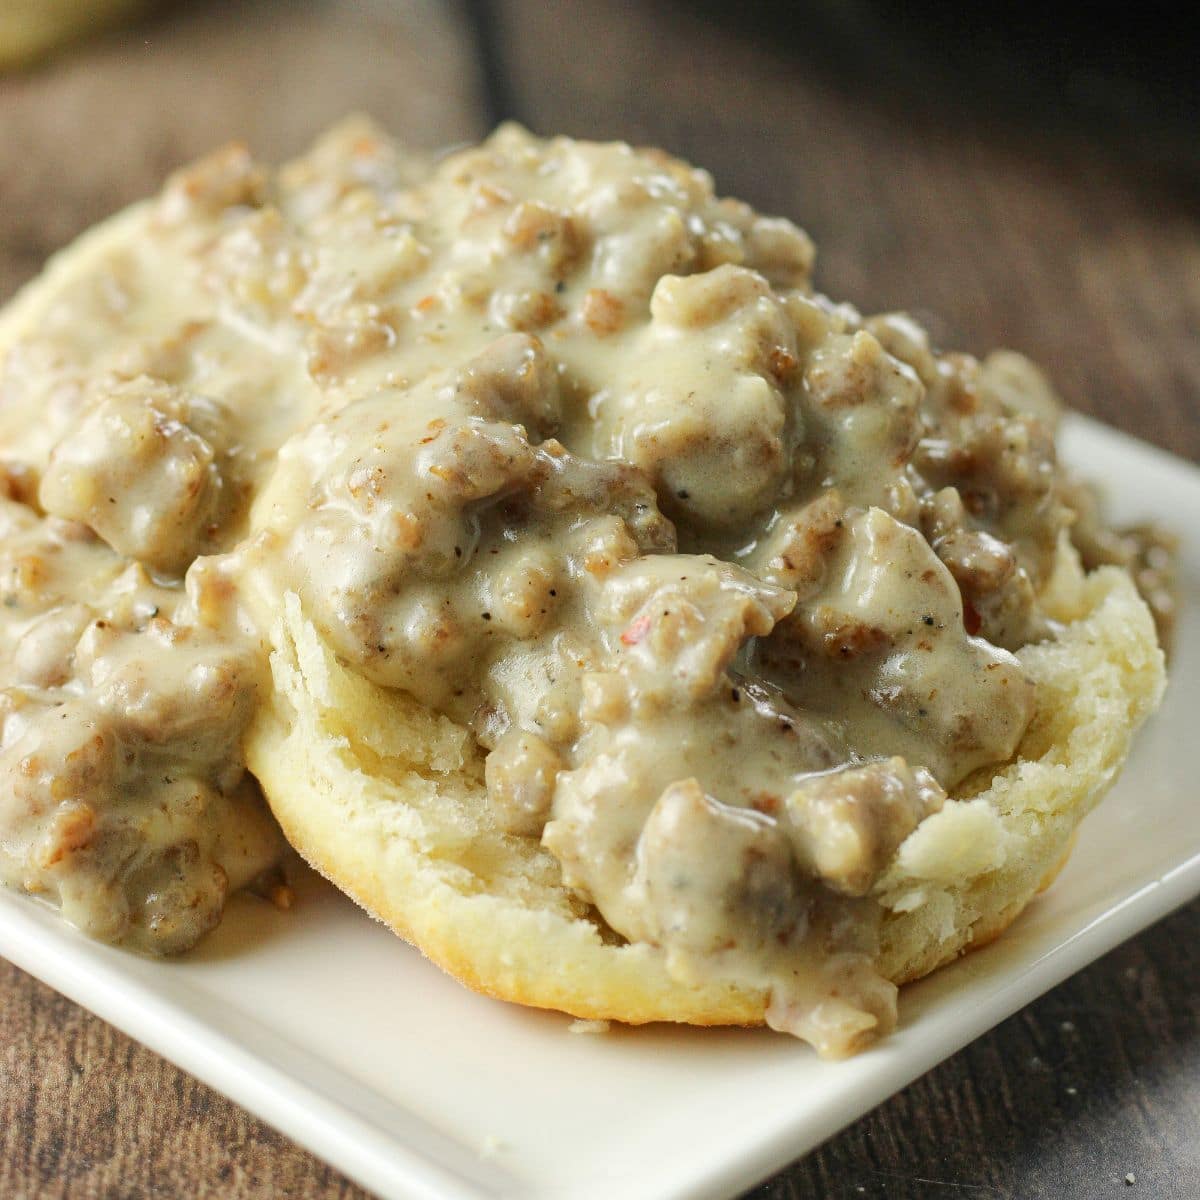 biscuits topped with sausage gravy on a white plate